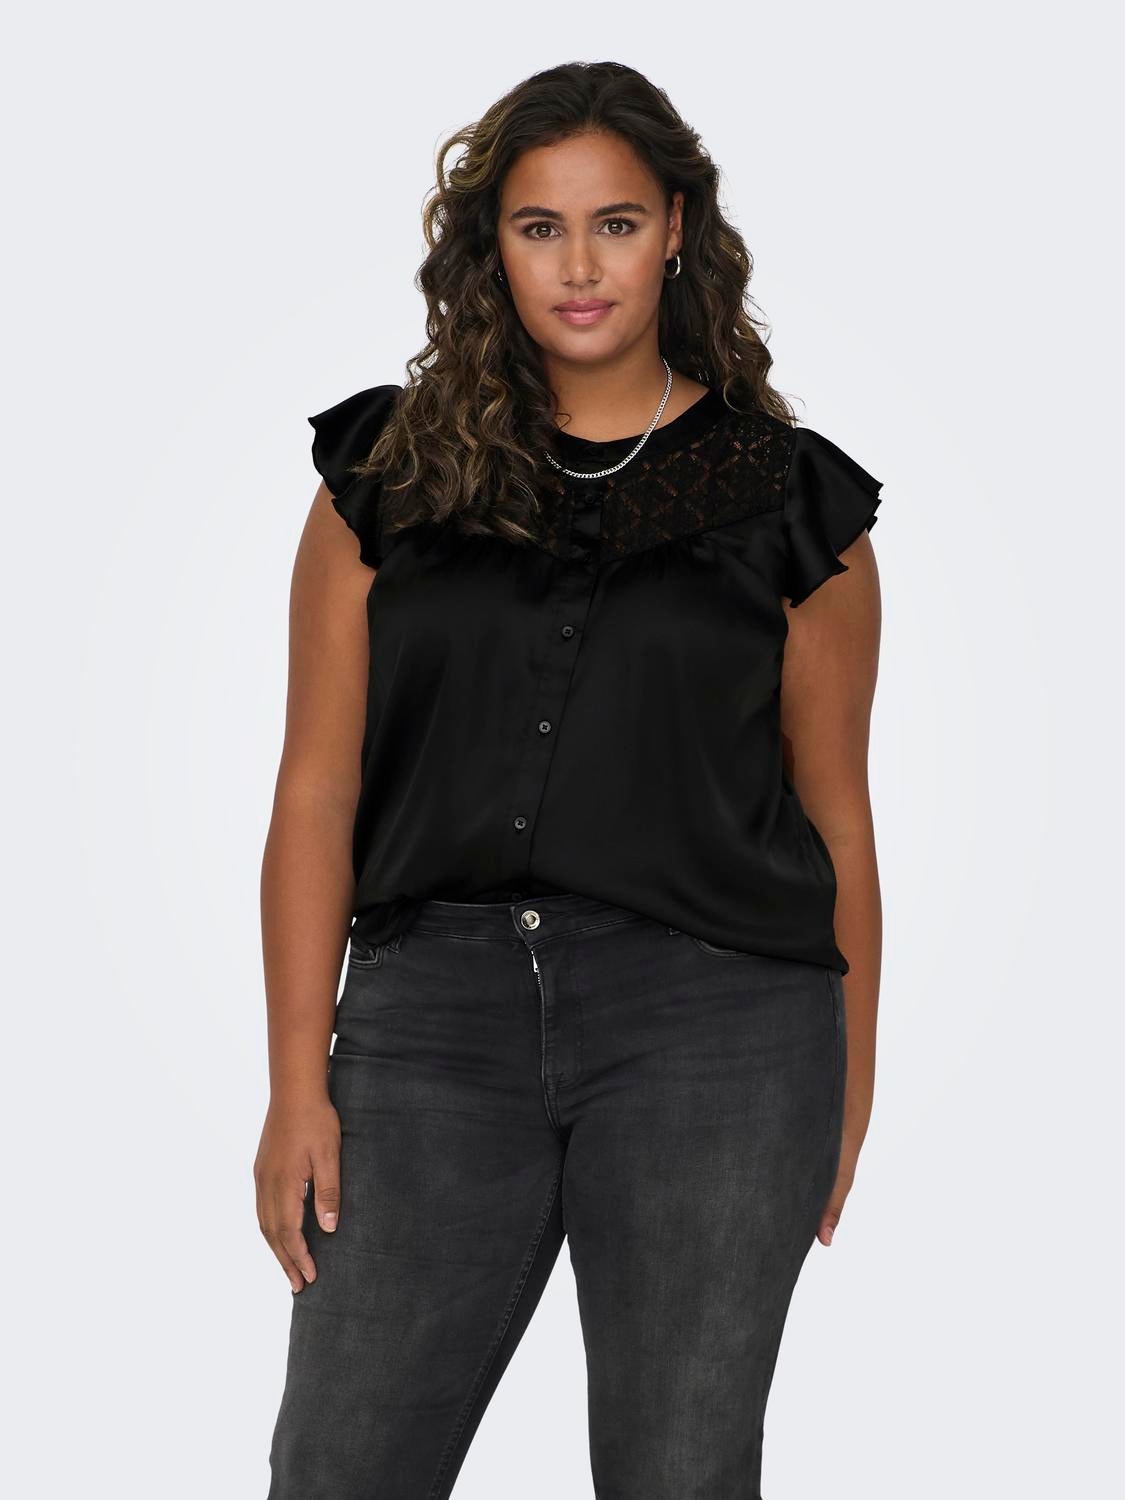 ONLY Curvy o-neck top -Black - 15308064